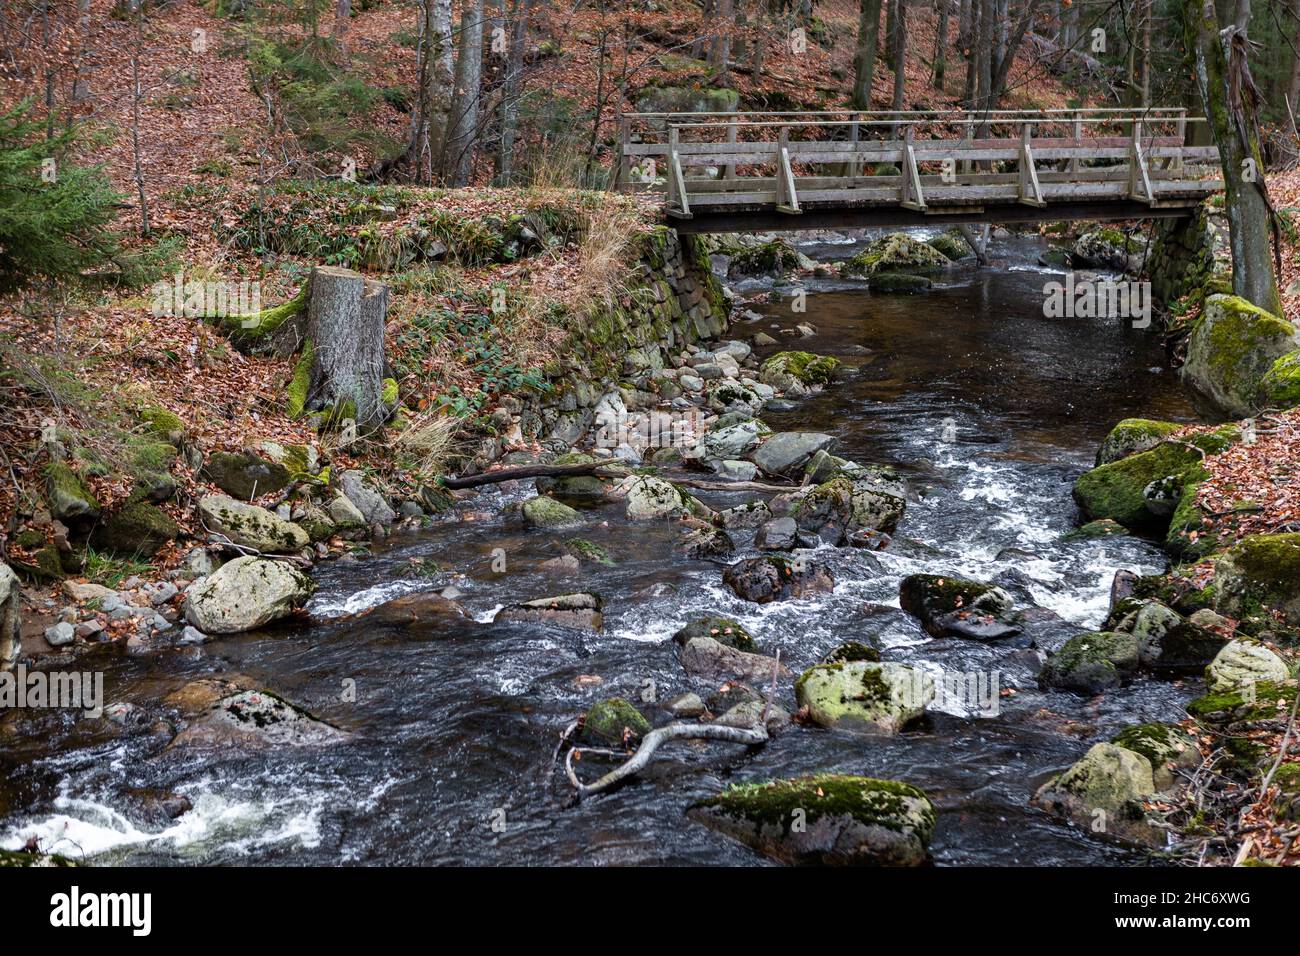 Nature view of a wooden bridge in the forest over a creek with big mossy rocks Stock Photo